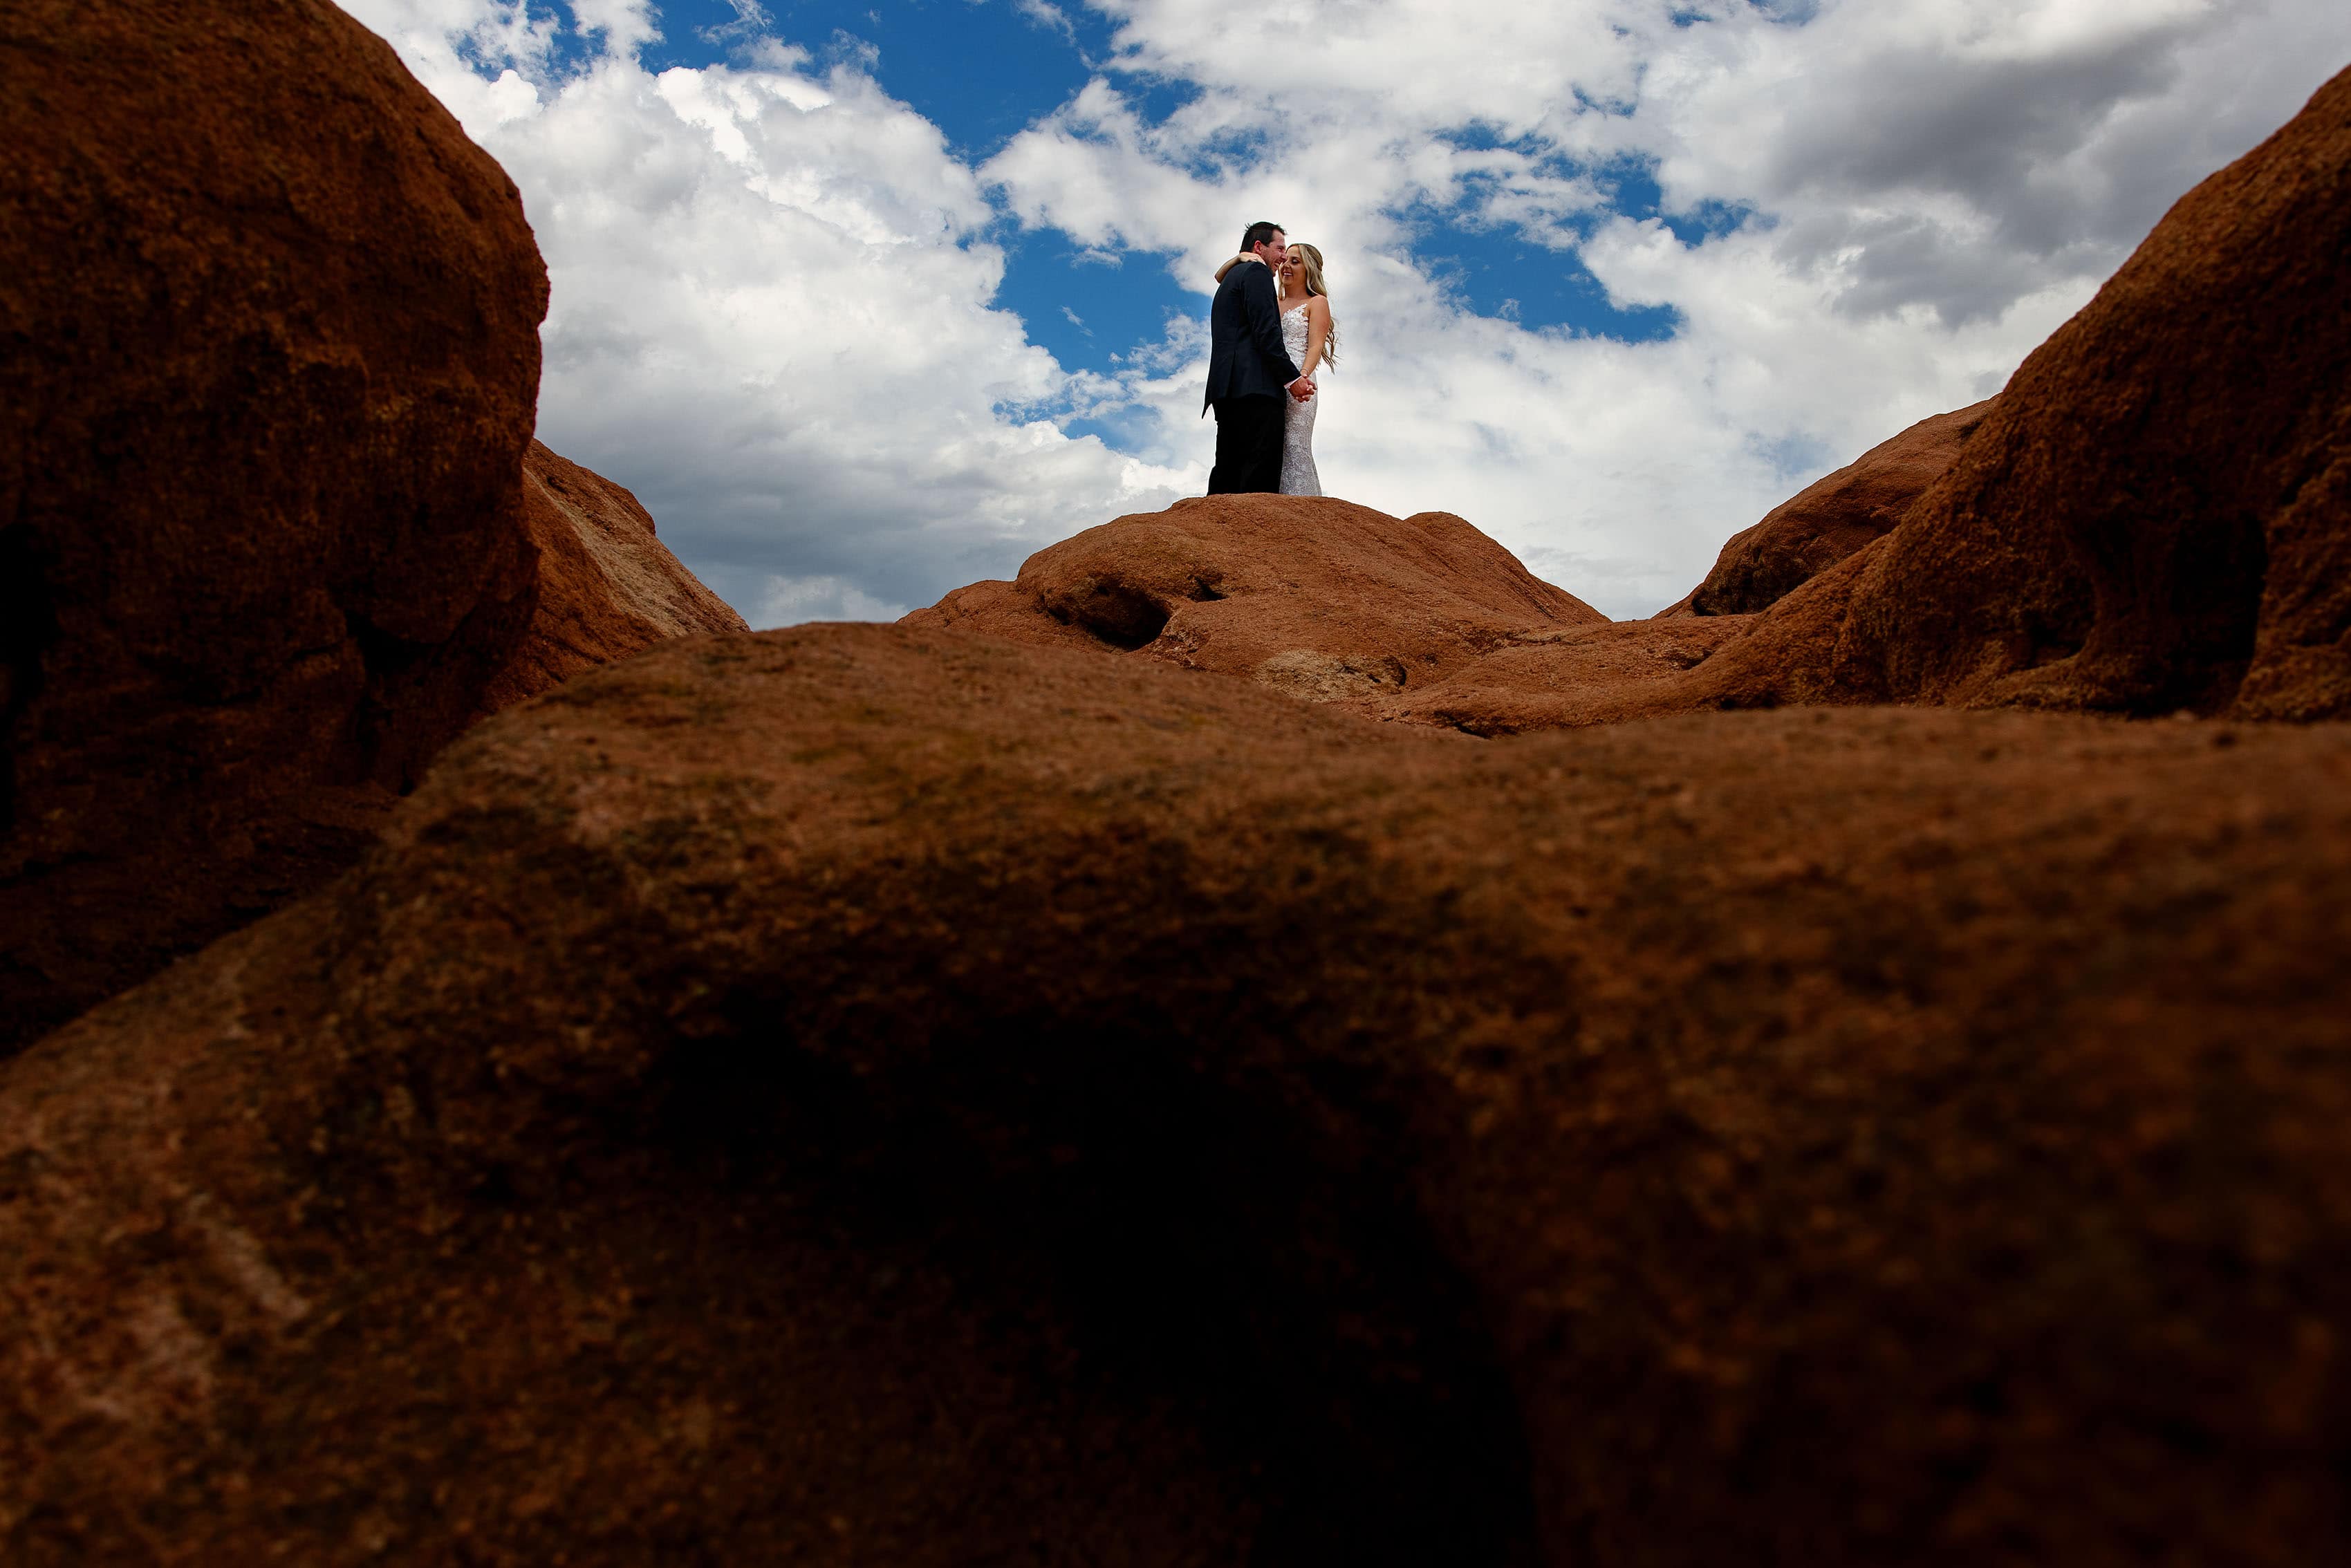 Jamie and Chad pose together on a red rock formation at Garden of the Gods park in Colorado Springs on their wedding day